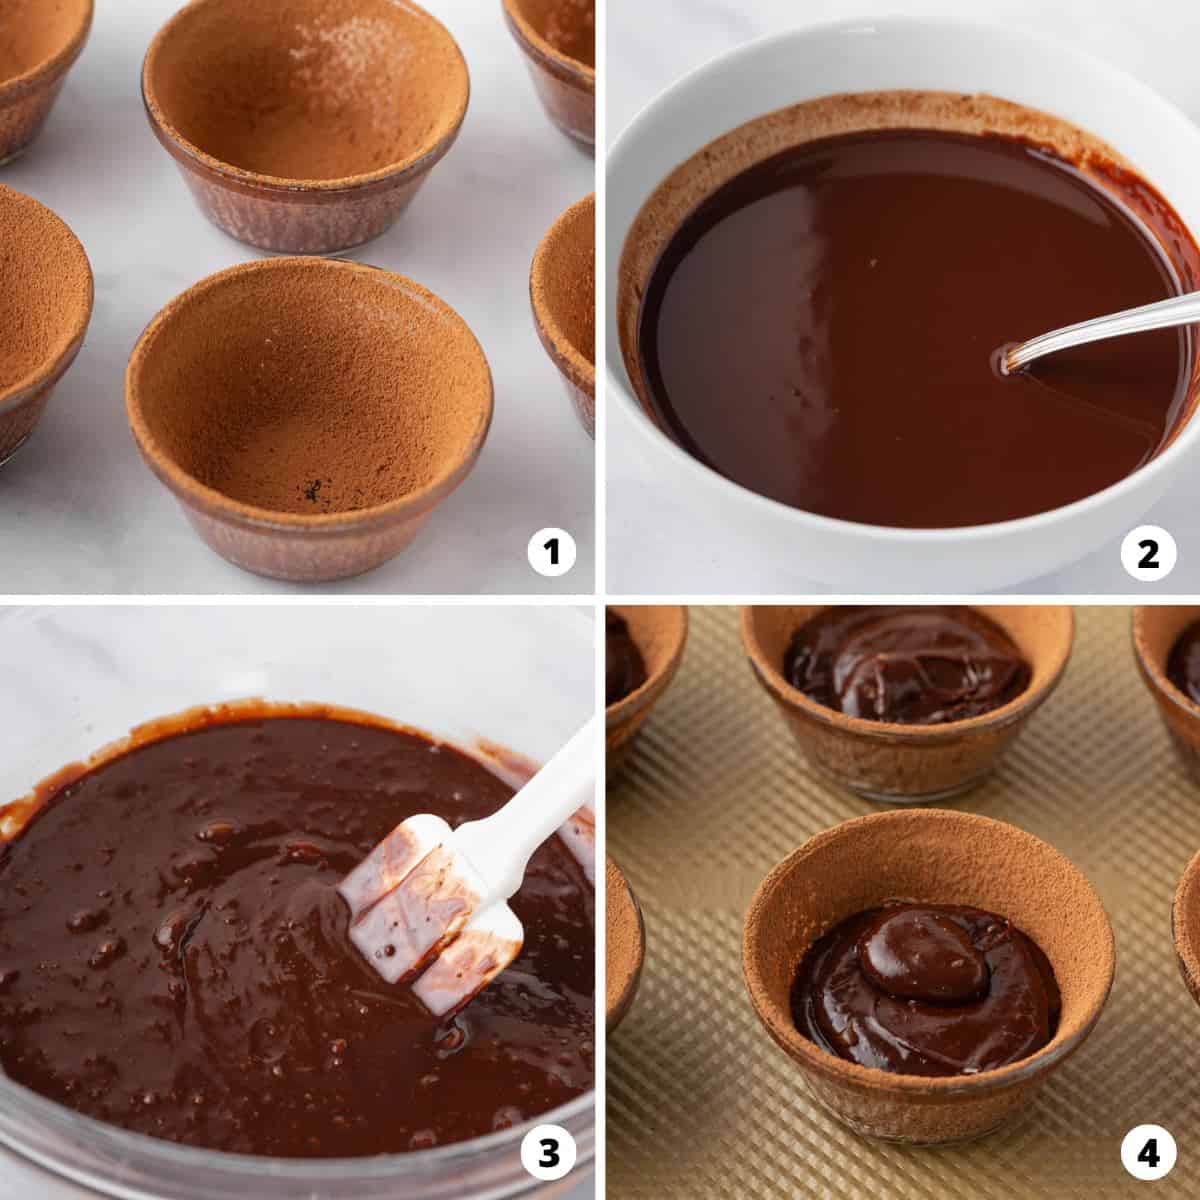 Showing how to make chocolate lava cake in a 4 step collage.